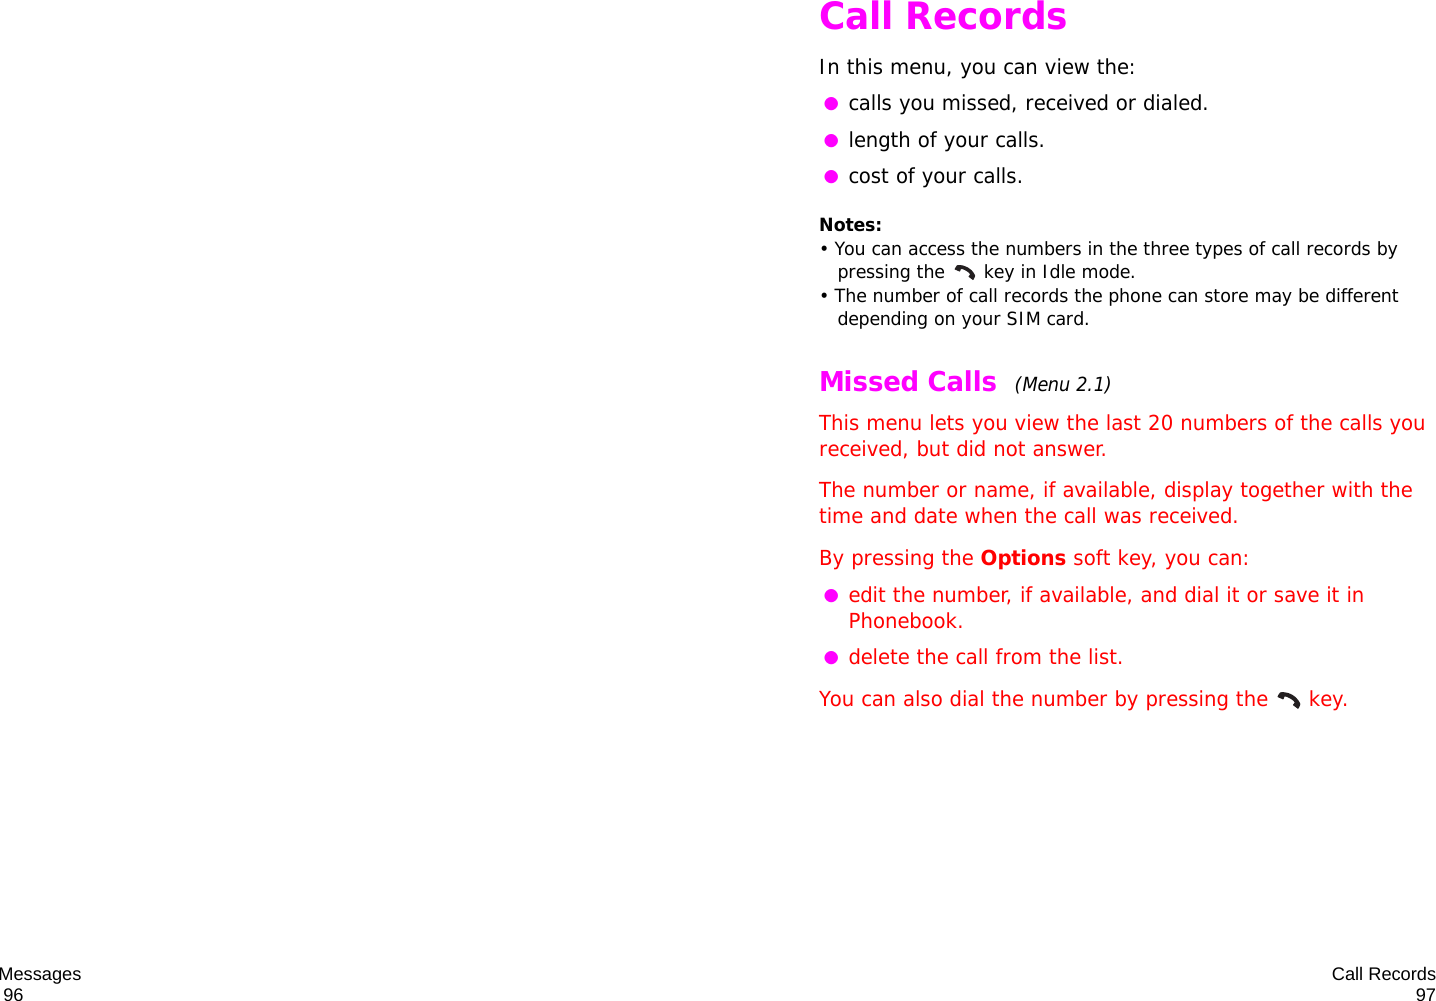 Messages                                                                                       96 Call Records97Call RecordsIn this menu, you can view the: ●calls you missed, received or dialed. ●length of your calls. ●cost of your calls.Notes: • You can access the numbers in the three types of call records by pressing the   key in Idle mode.• The number of call records the phone can store may be different depending on your SIM card.Missed Calls  (Menu 2.1) This menu lets you view the last 20 numbers of the calls you received, but did not answer. The number or name, if available, display together with the time and date when the call was received. By pressing the Options soft key, you can: ●edit the number, if available, and dial it or save it in Phonebook. ●delete the call from the list.You can also dial the number by pressing the  key.